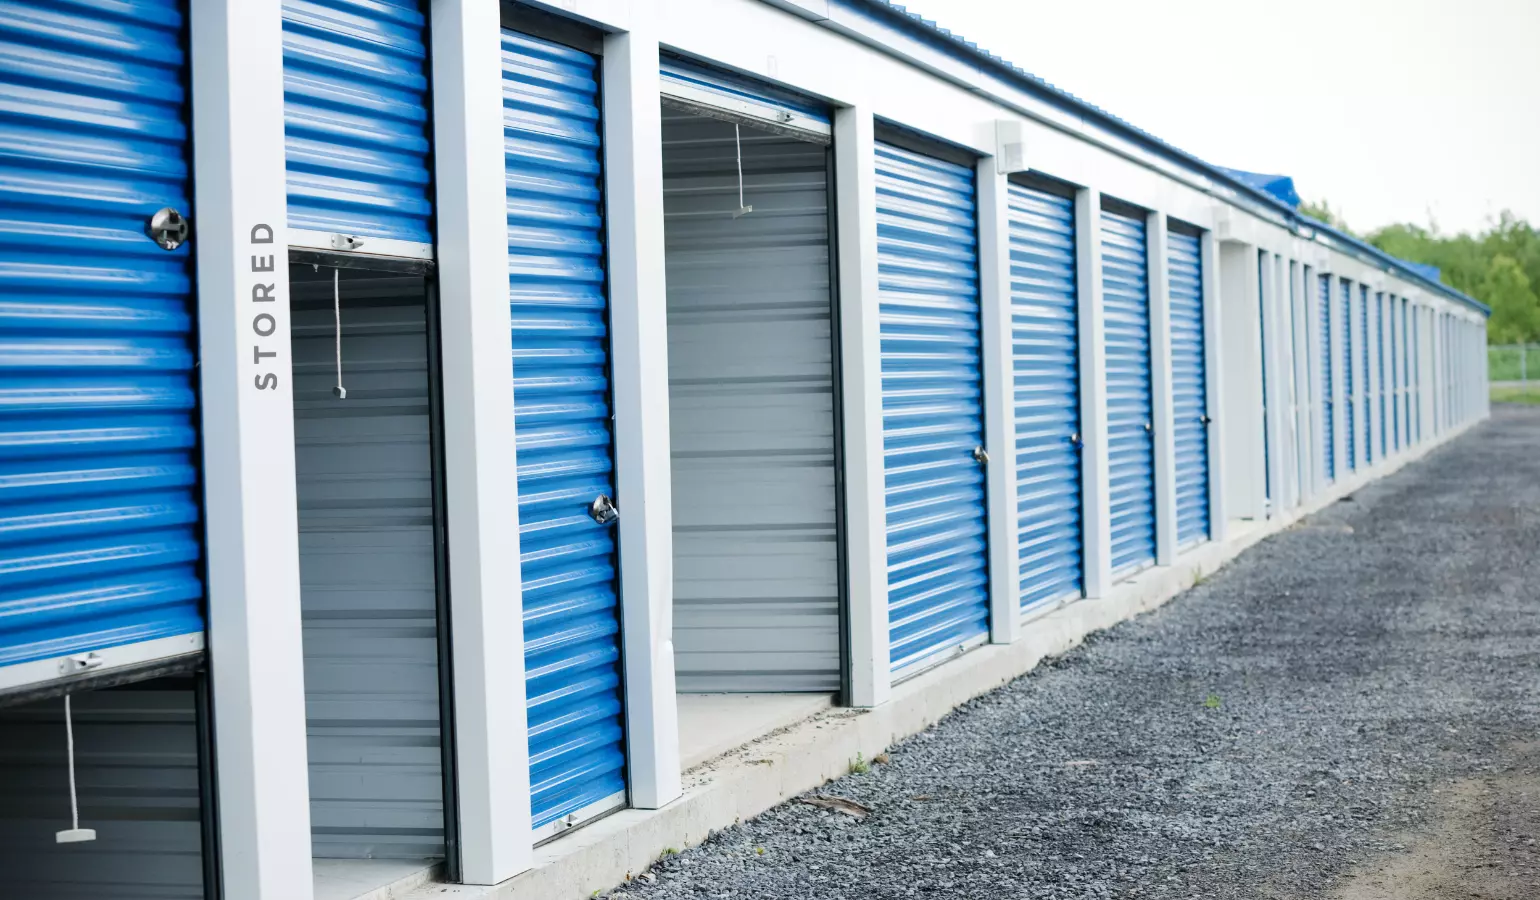 What To Look For When Choosing A Storage Unit?